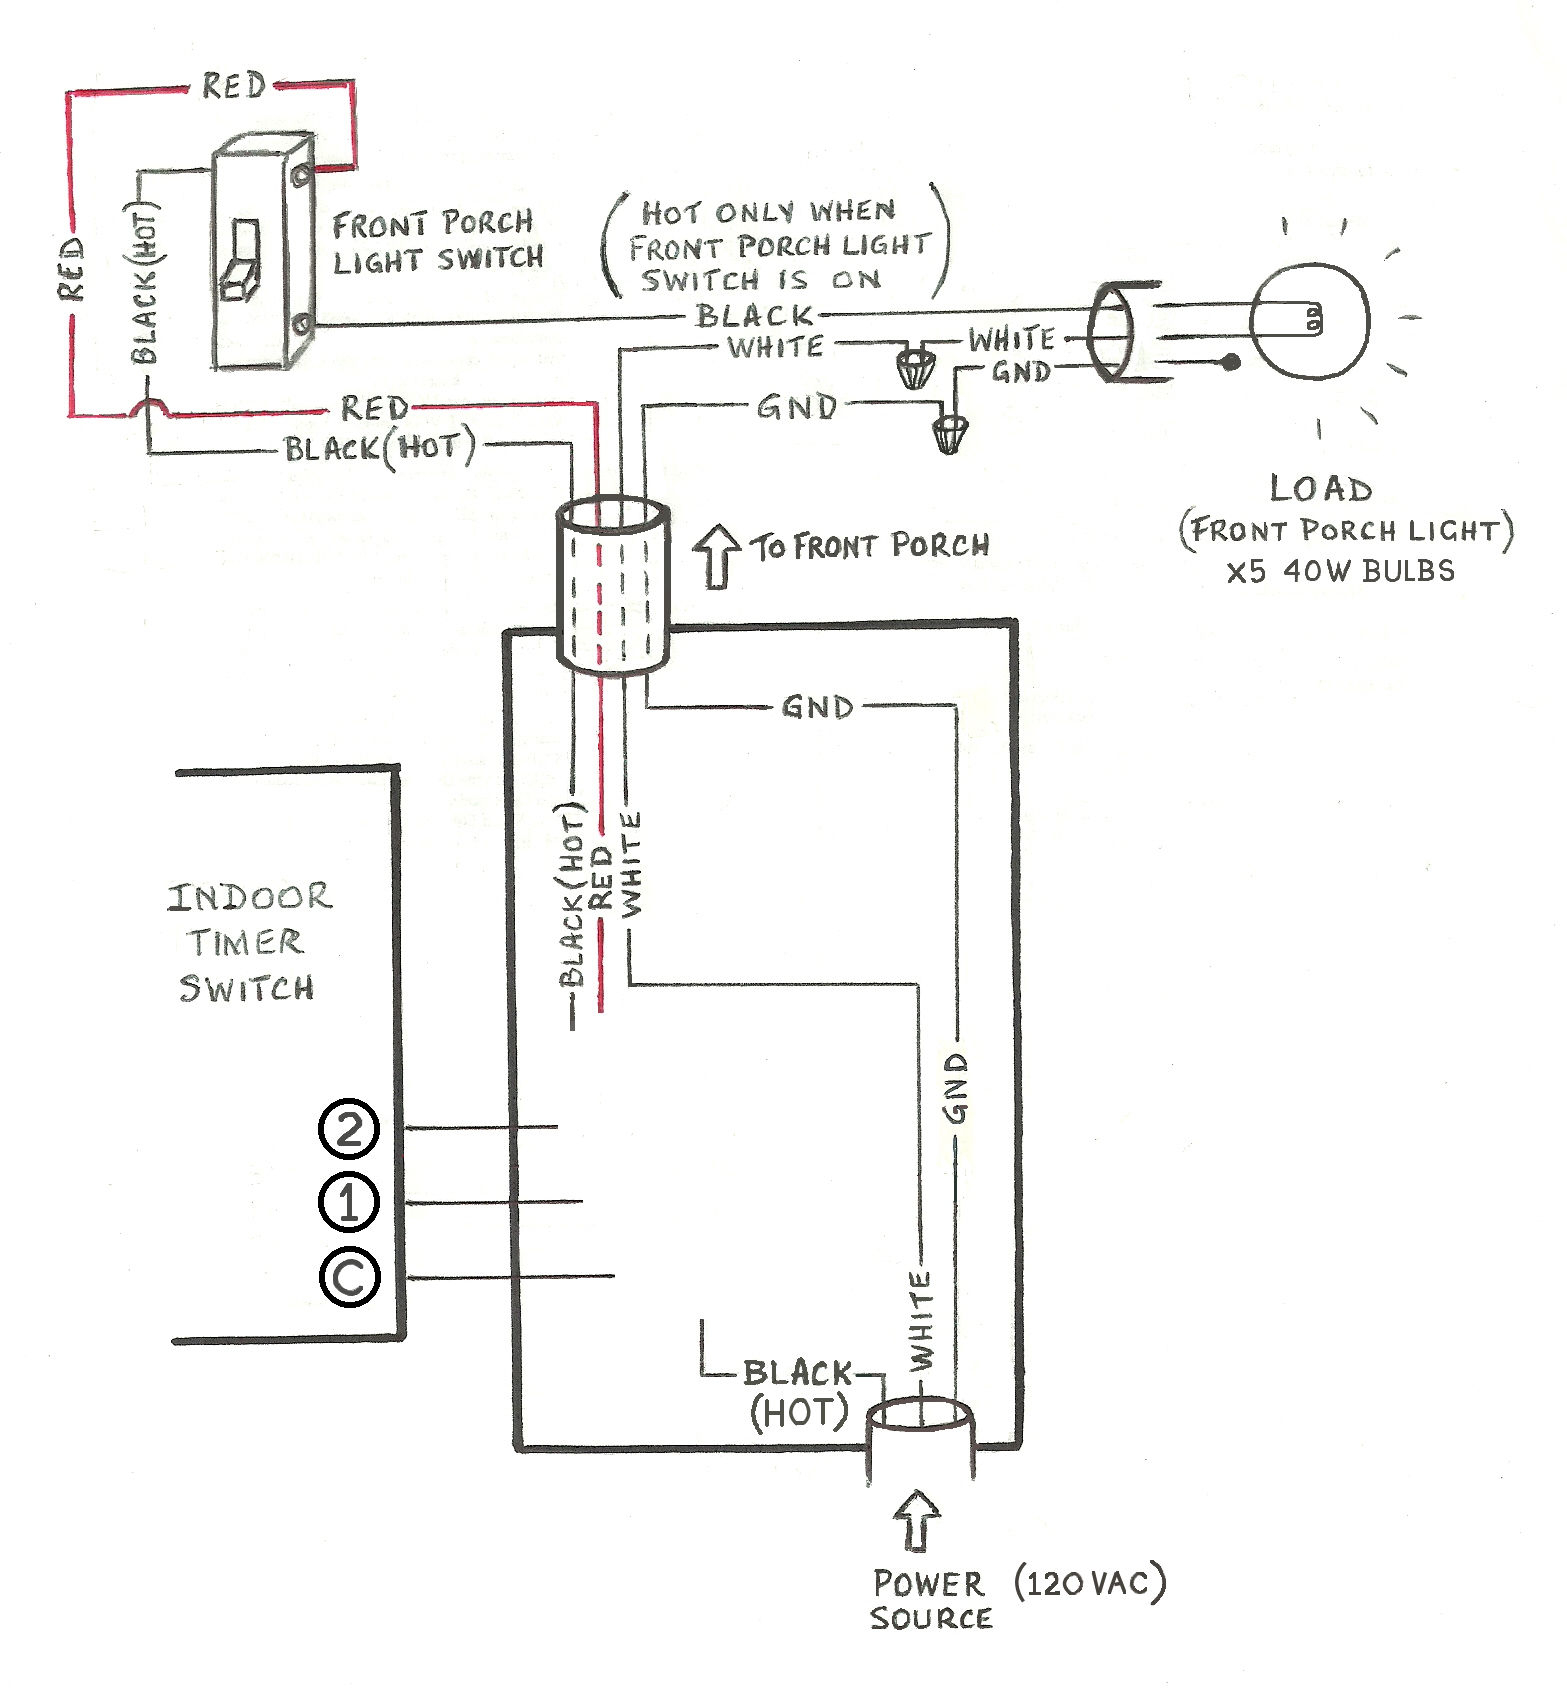 Need Help Wiring A 3-Way Honeywell Digital Timer Switch - Home - 3 Way Lamp Switch Wiring Diagram